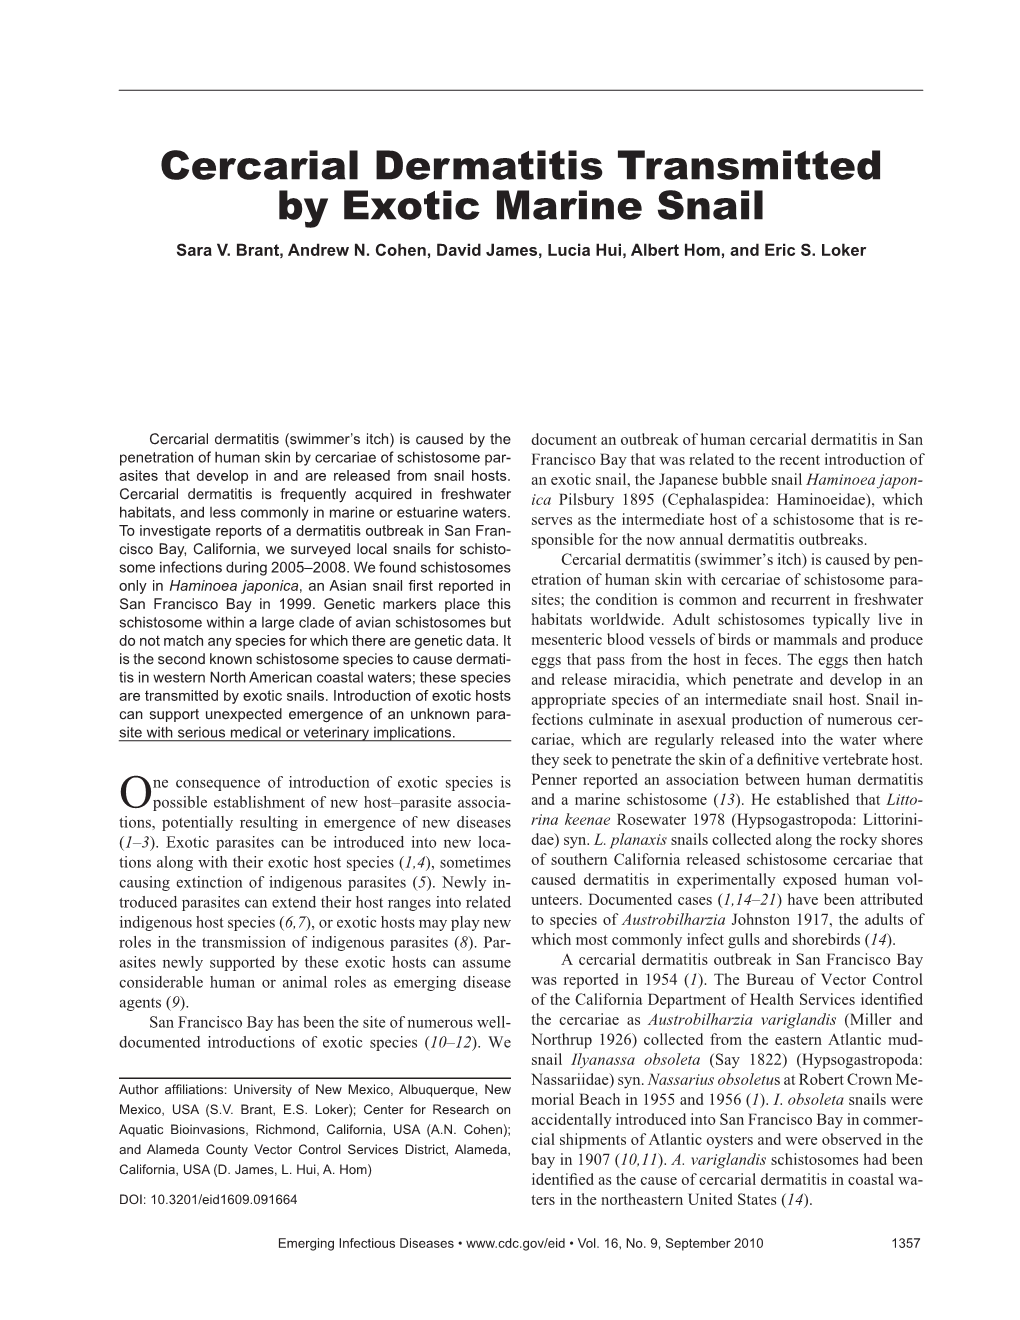 Cercarial Dermatitis Transmitted by Exotic Marine Snail Sara V